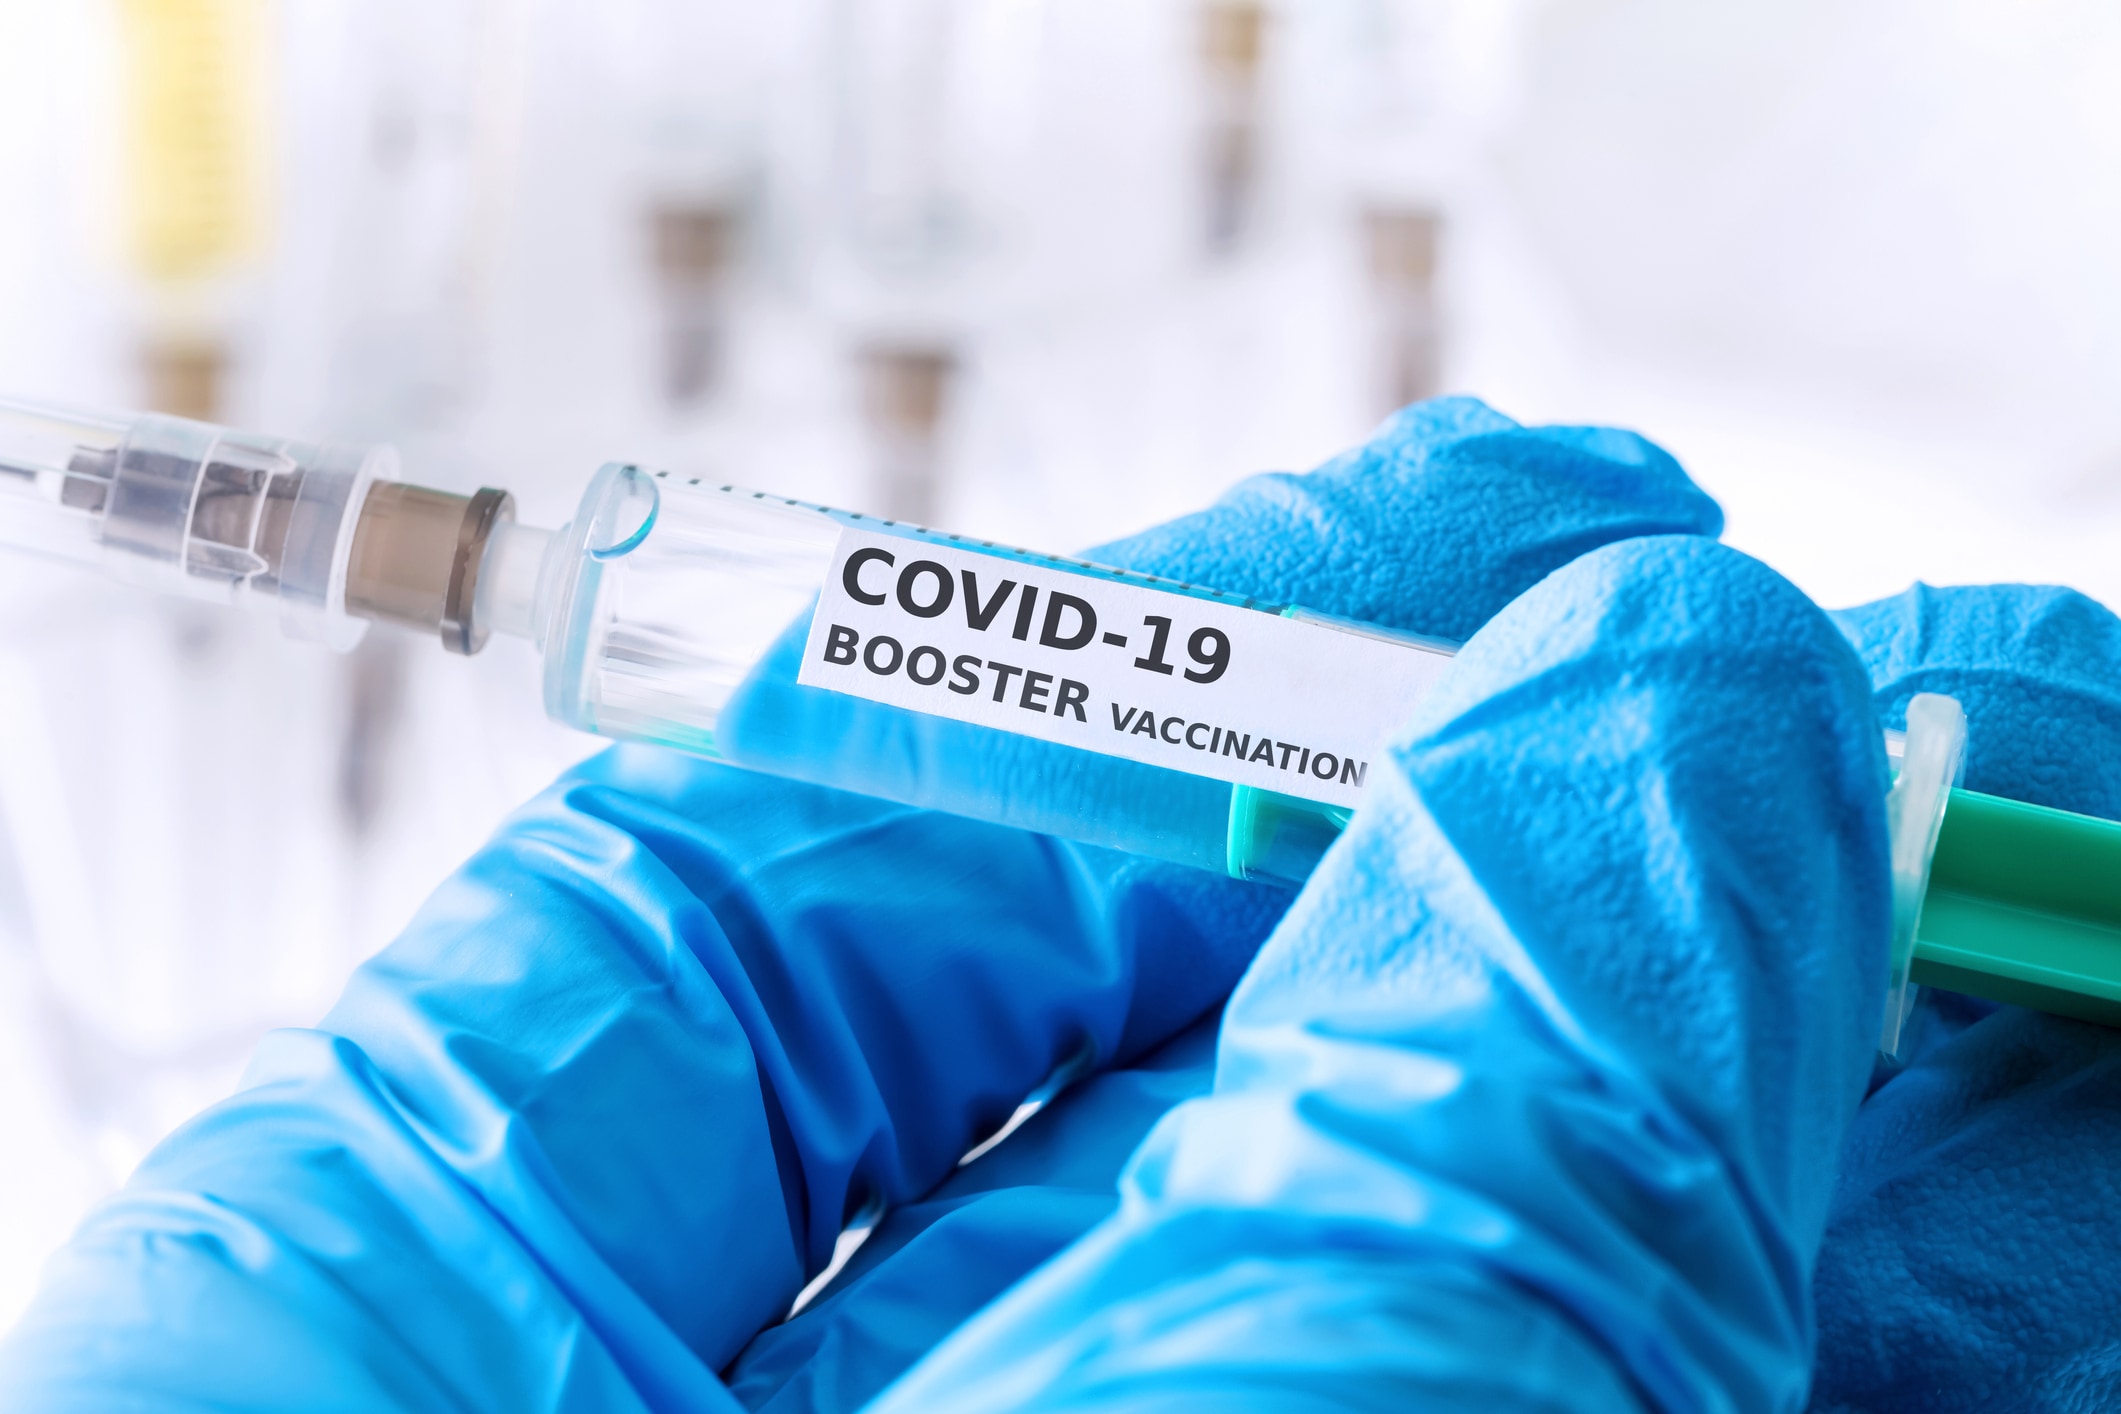 COVID vaccine boosters for seniors: Here’s what we know so far